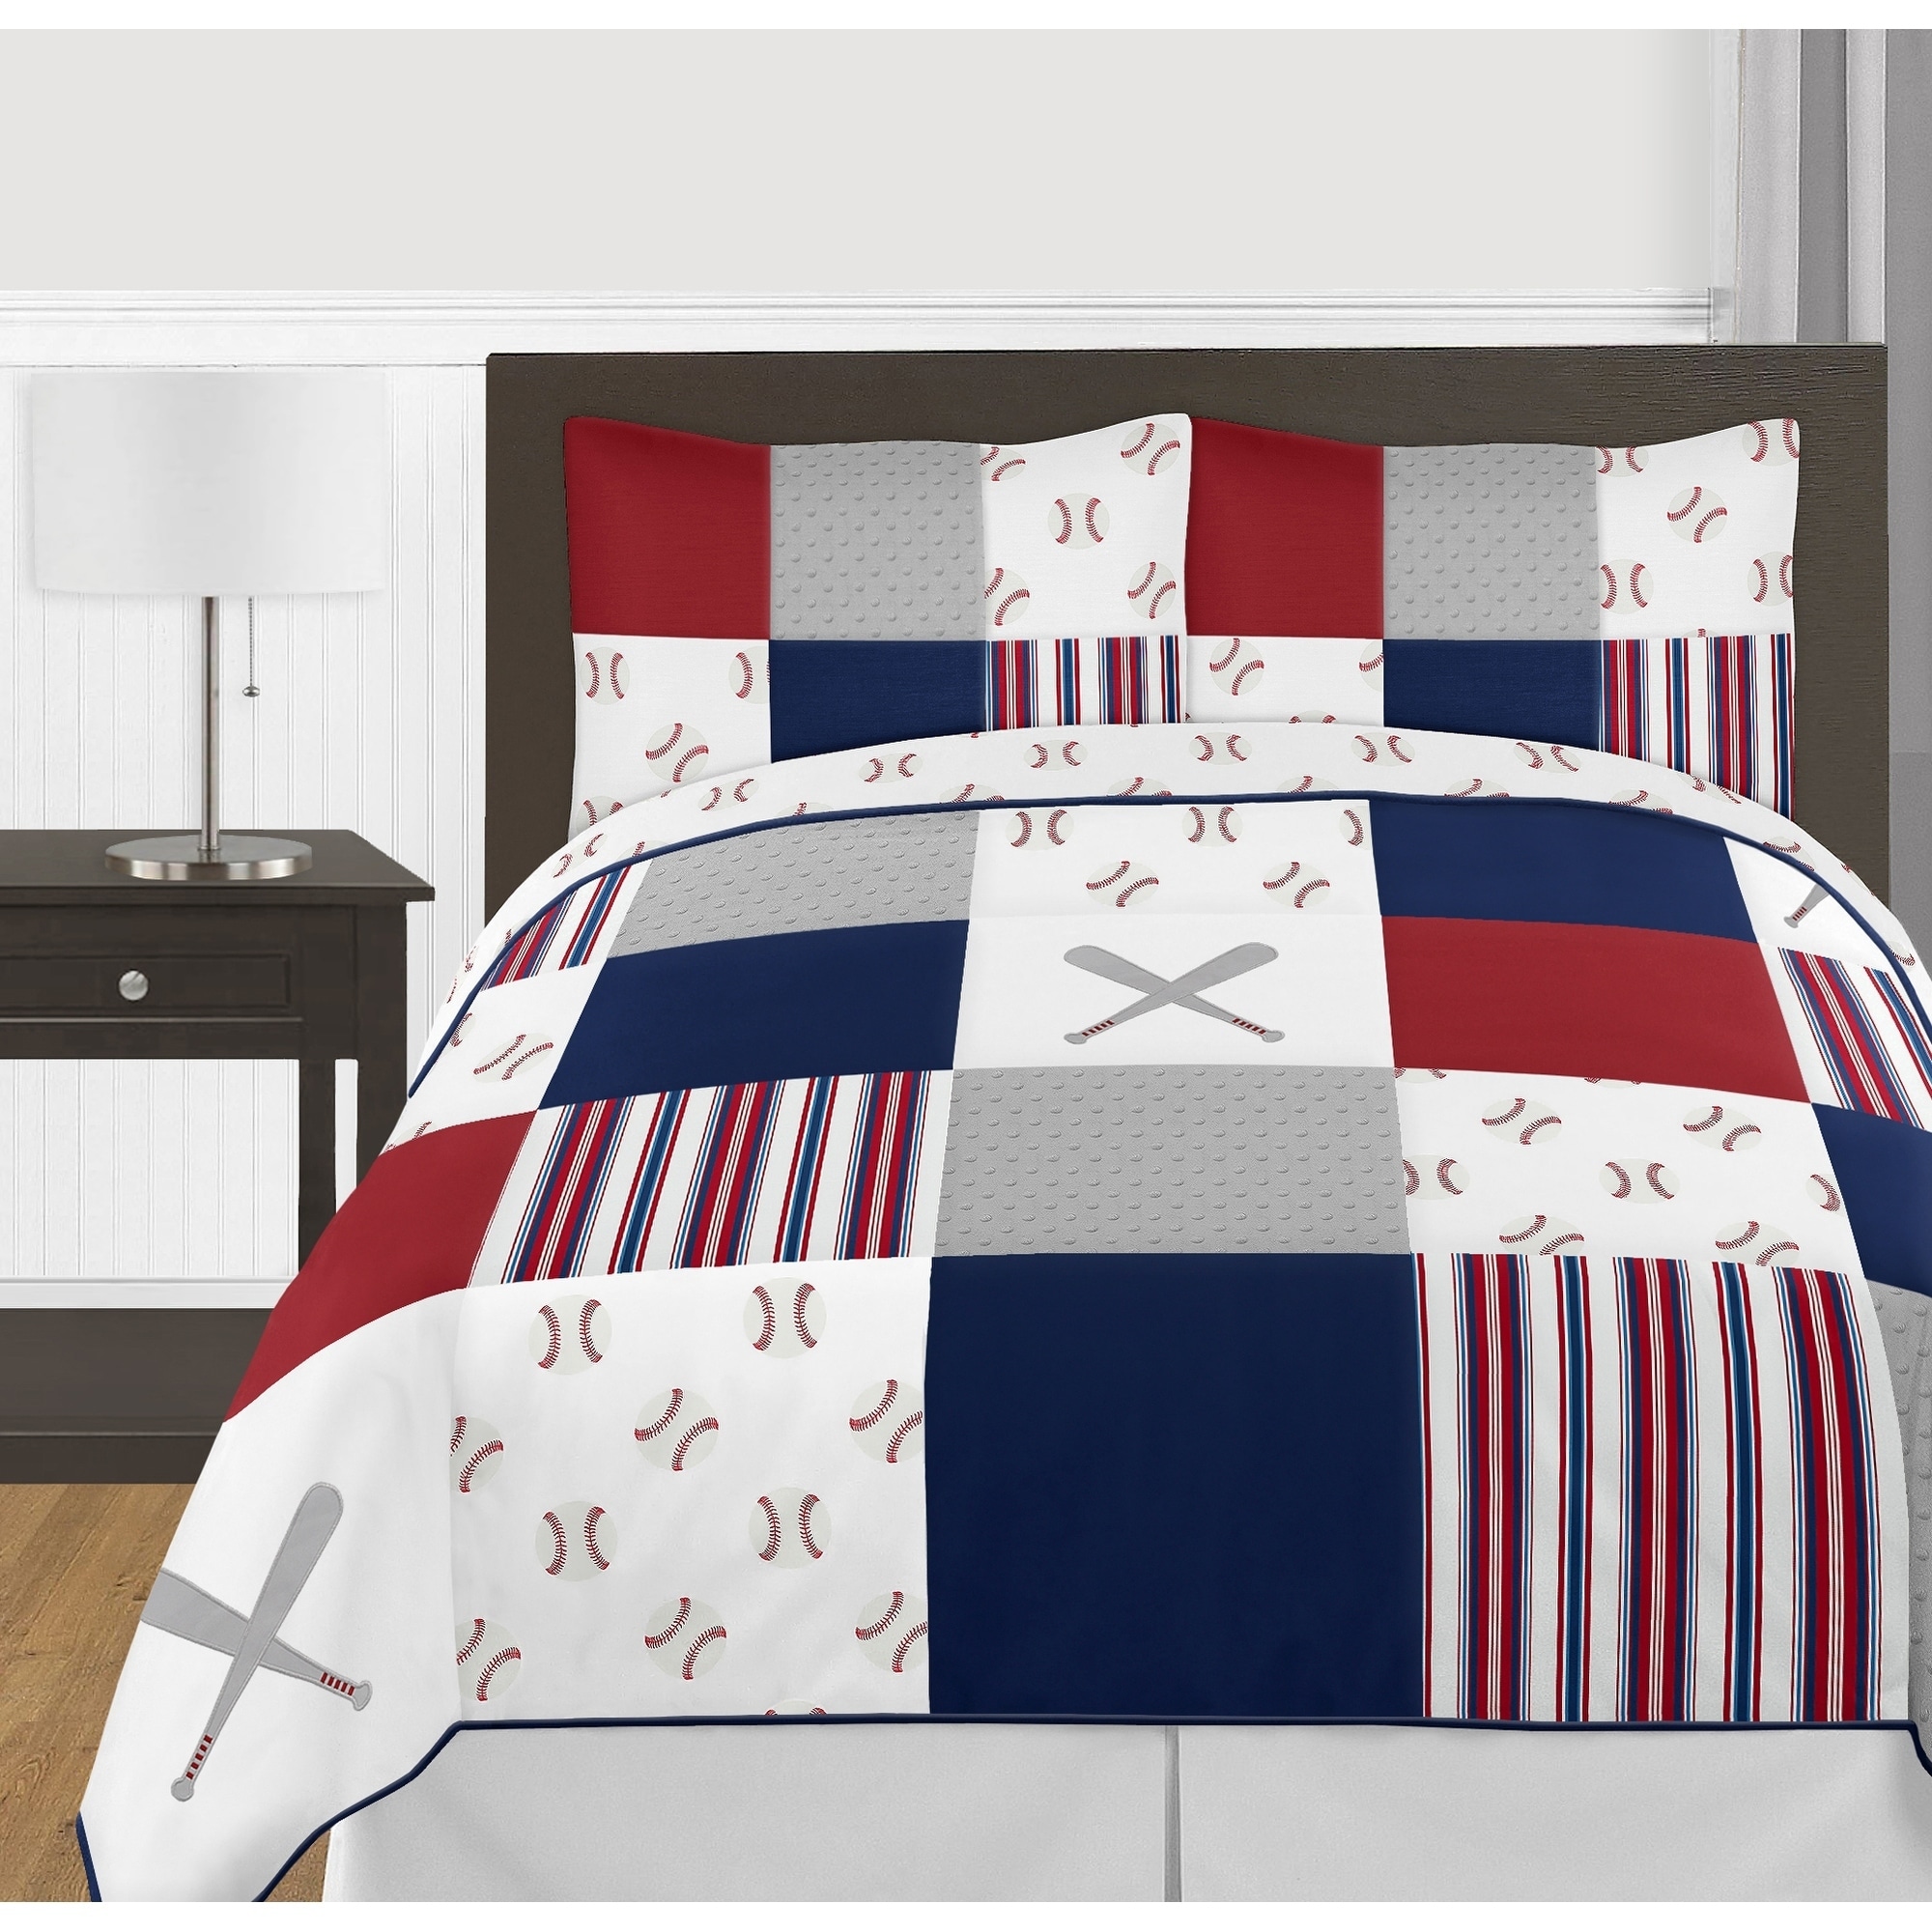 Baseball Bedding Set-Monogram Name-Duvet Cover-Shams-Rugby Stripes-Dark Blue-Red-White-Choose Colors-TwinTwin XL-FullQueen-King-Size